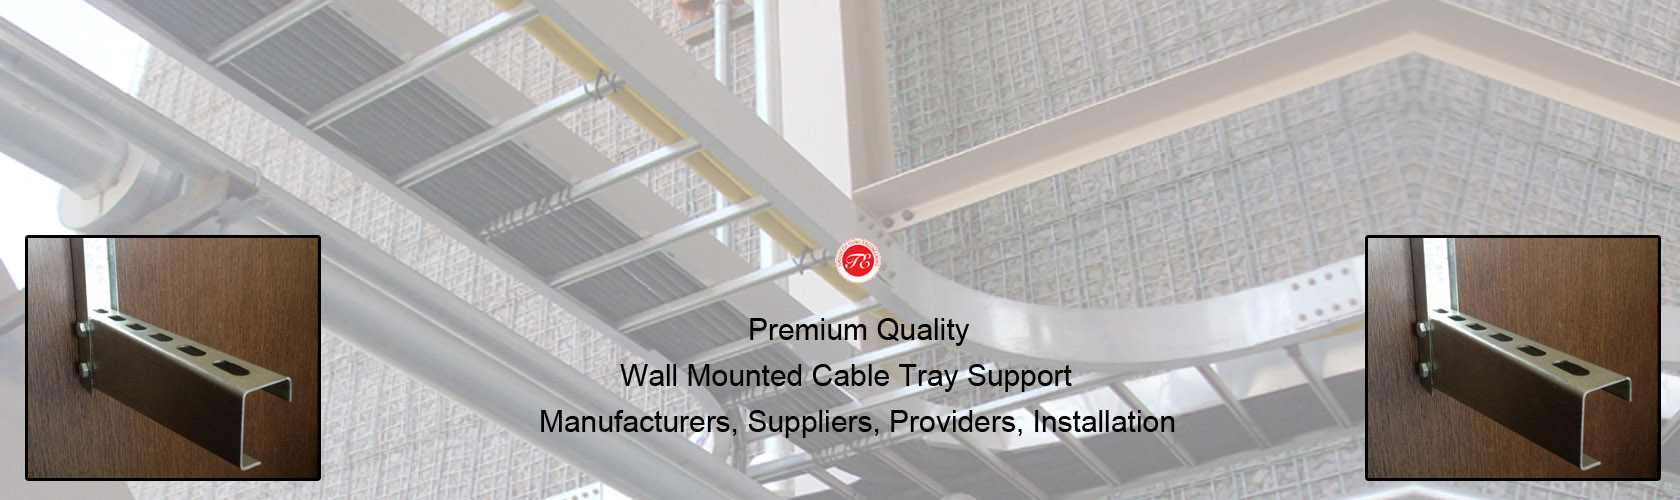 Wall Mounted Cable Tray Support Wall Mounted Cable Tray